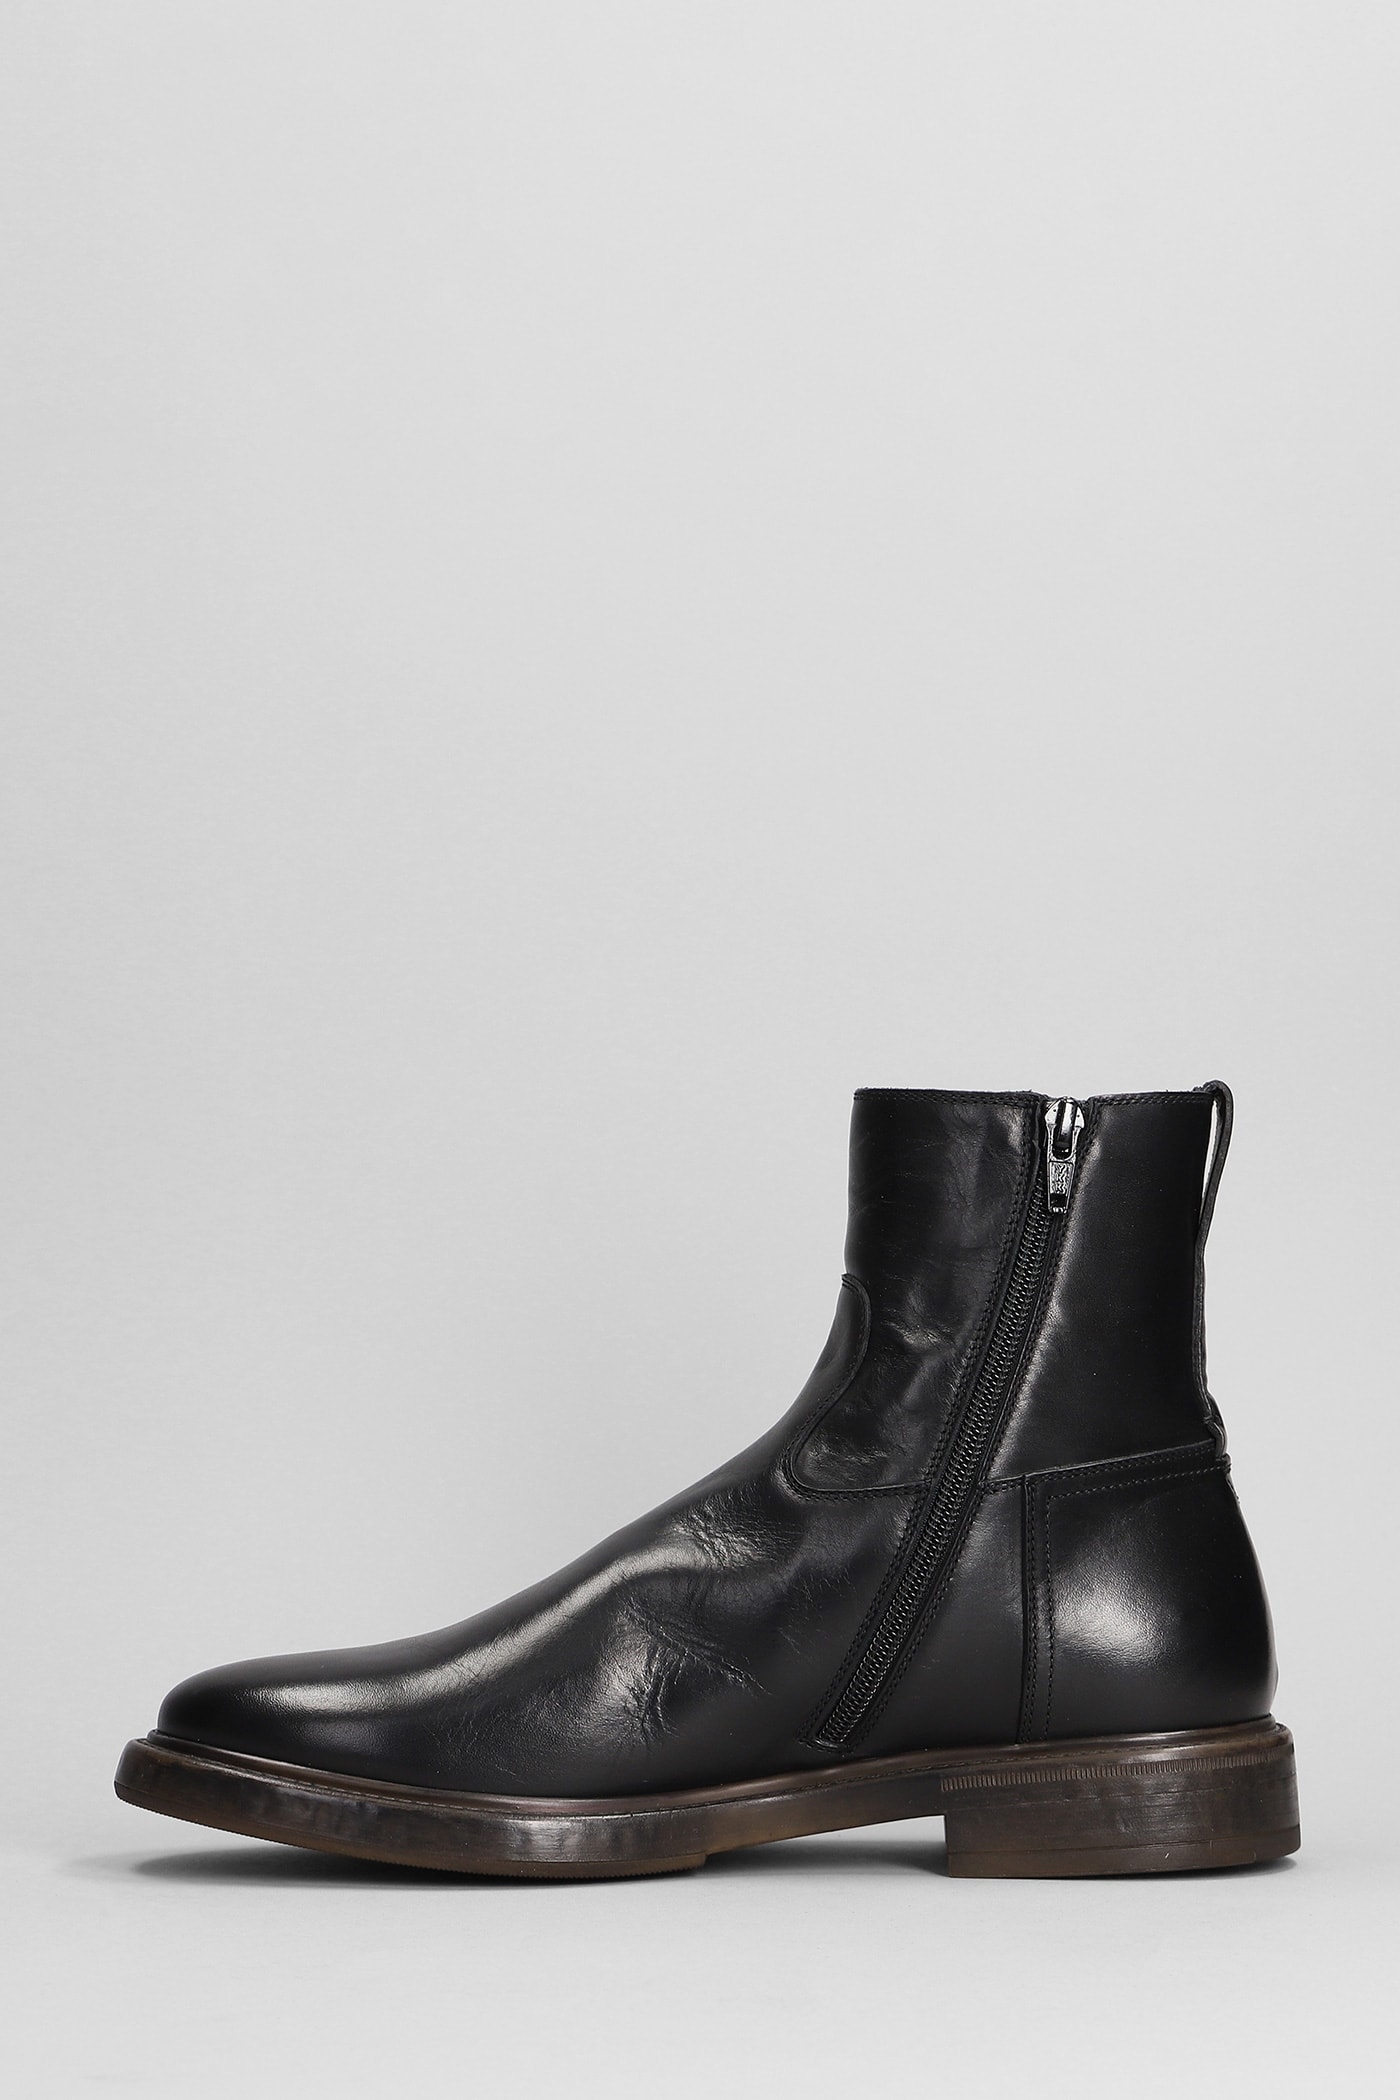 Shop Silvano Sassetti Low Heels Ankle Boots In Black Leather